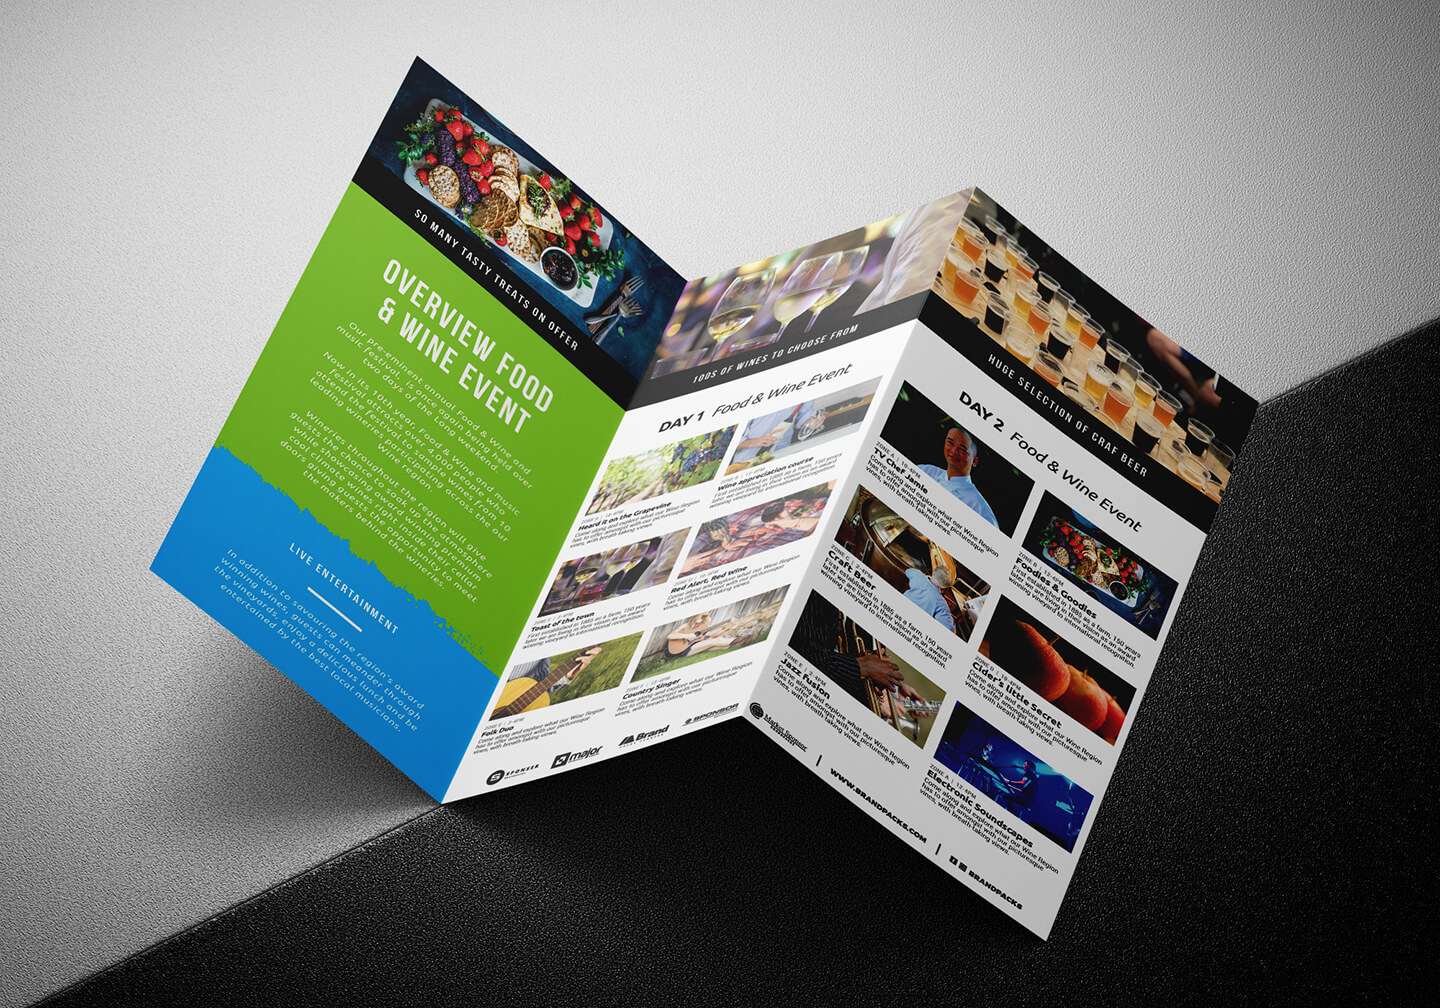 Free Tri Fold Brochure Template For Events & Festivals - Psd For Tri Fold Brochure Template Illustrator